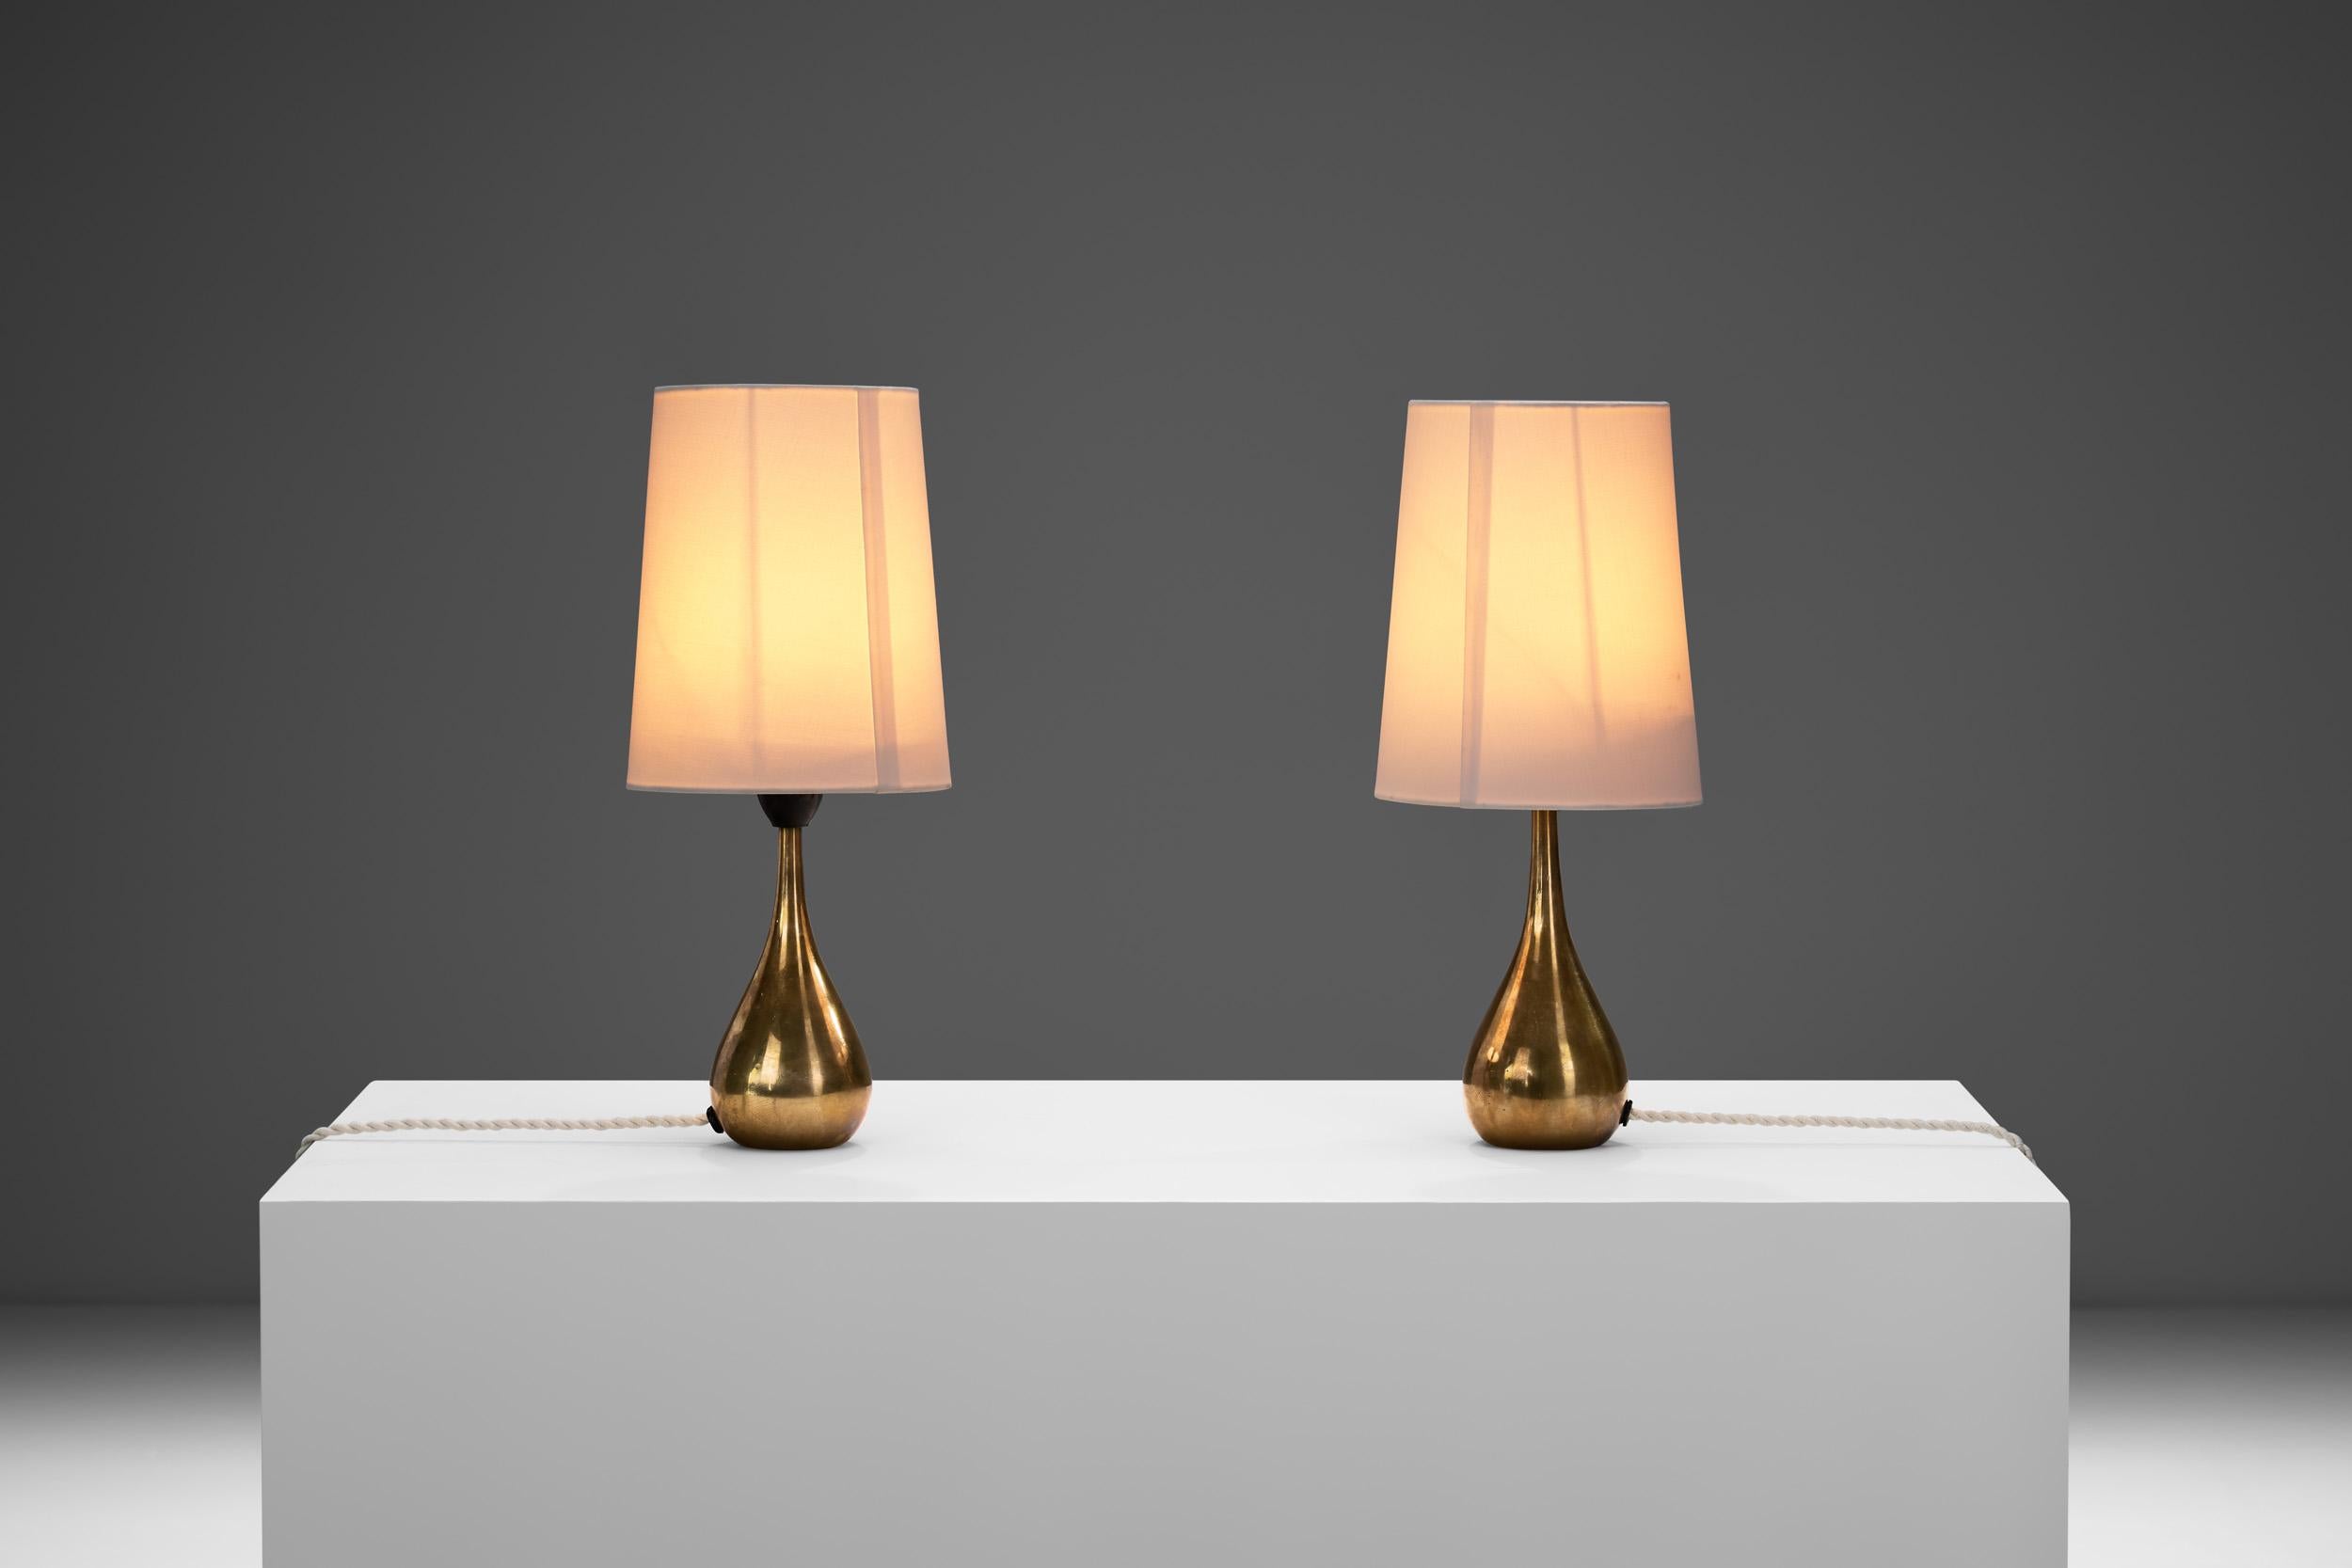 Mid-20th Century Mauri Almari Pair of “K 11-21” Brass Table Lamps for Idman Oy, Finland 1950s